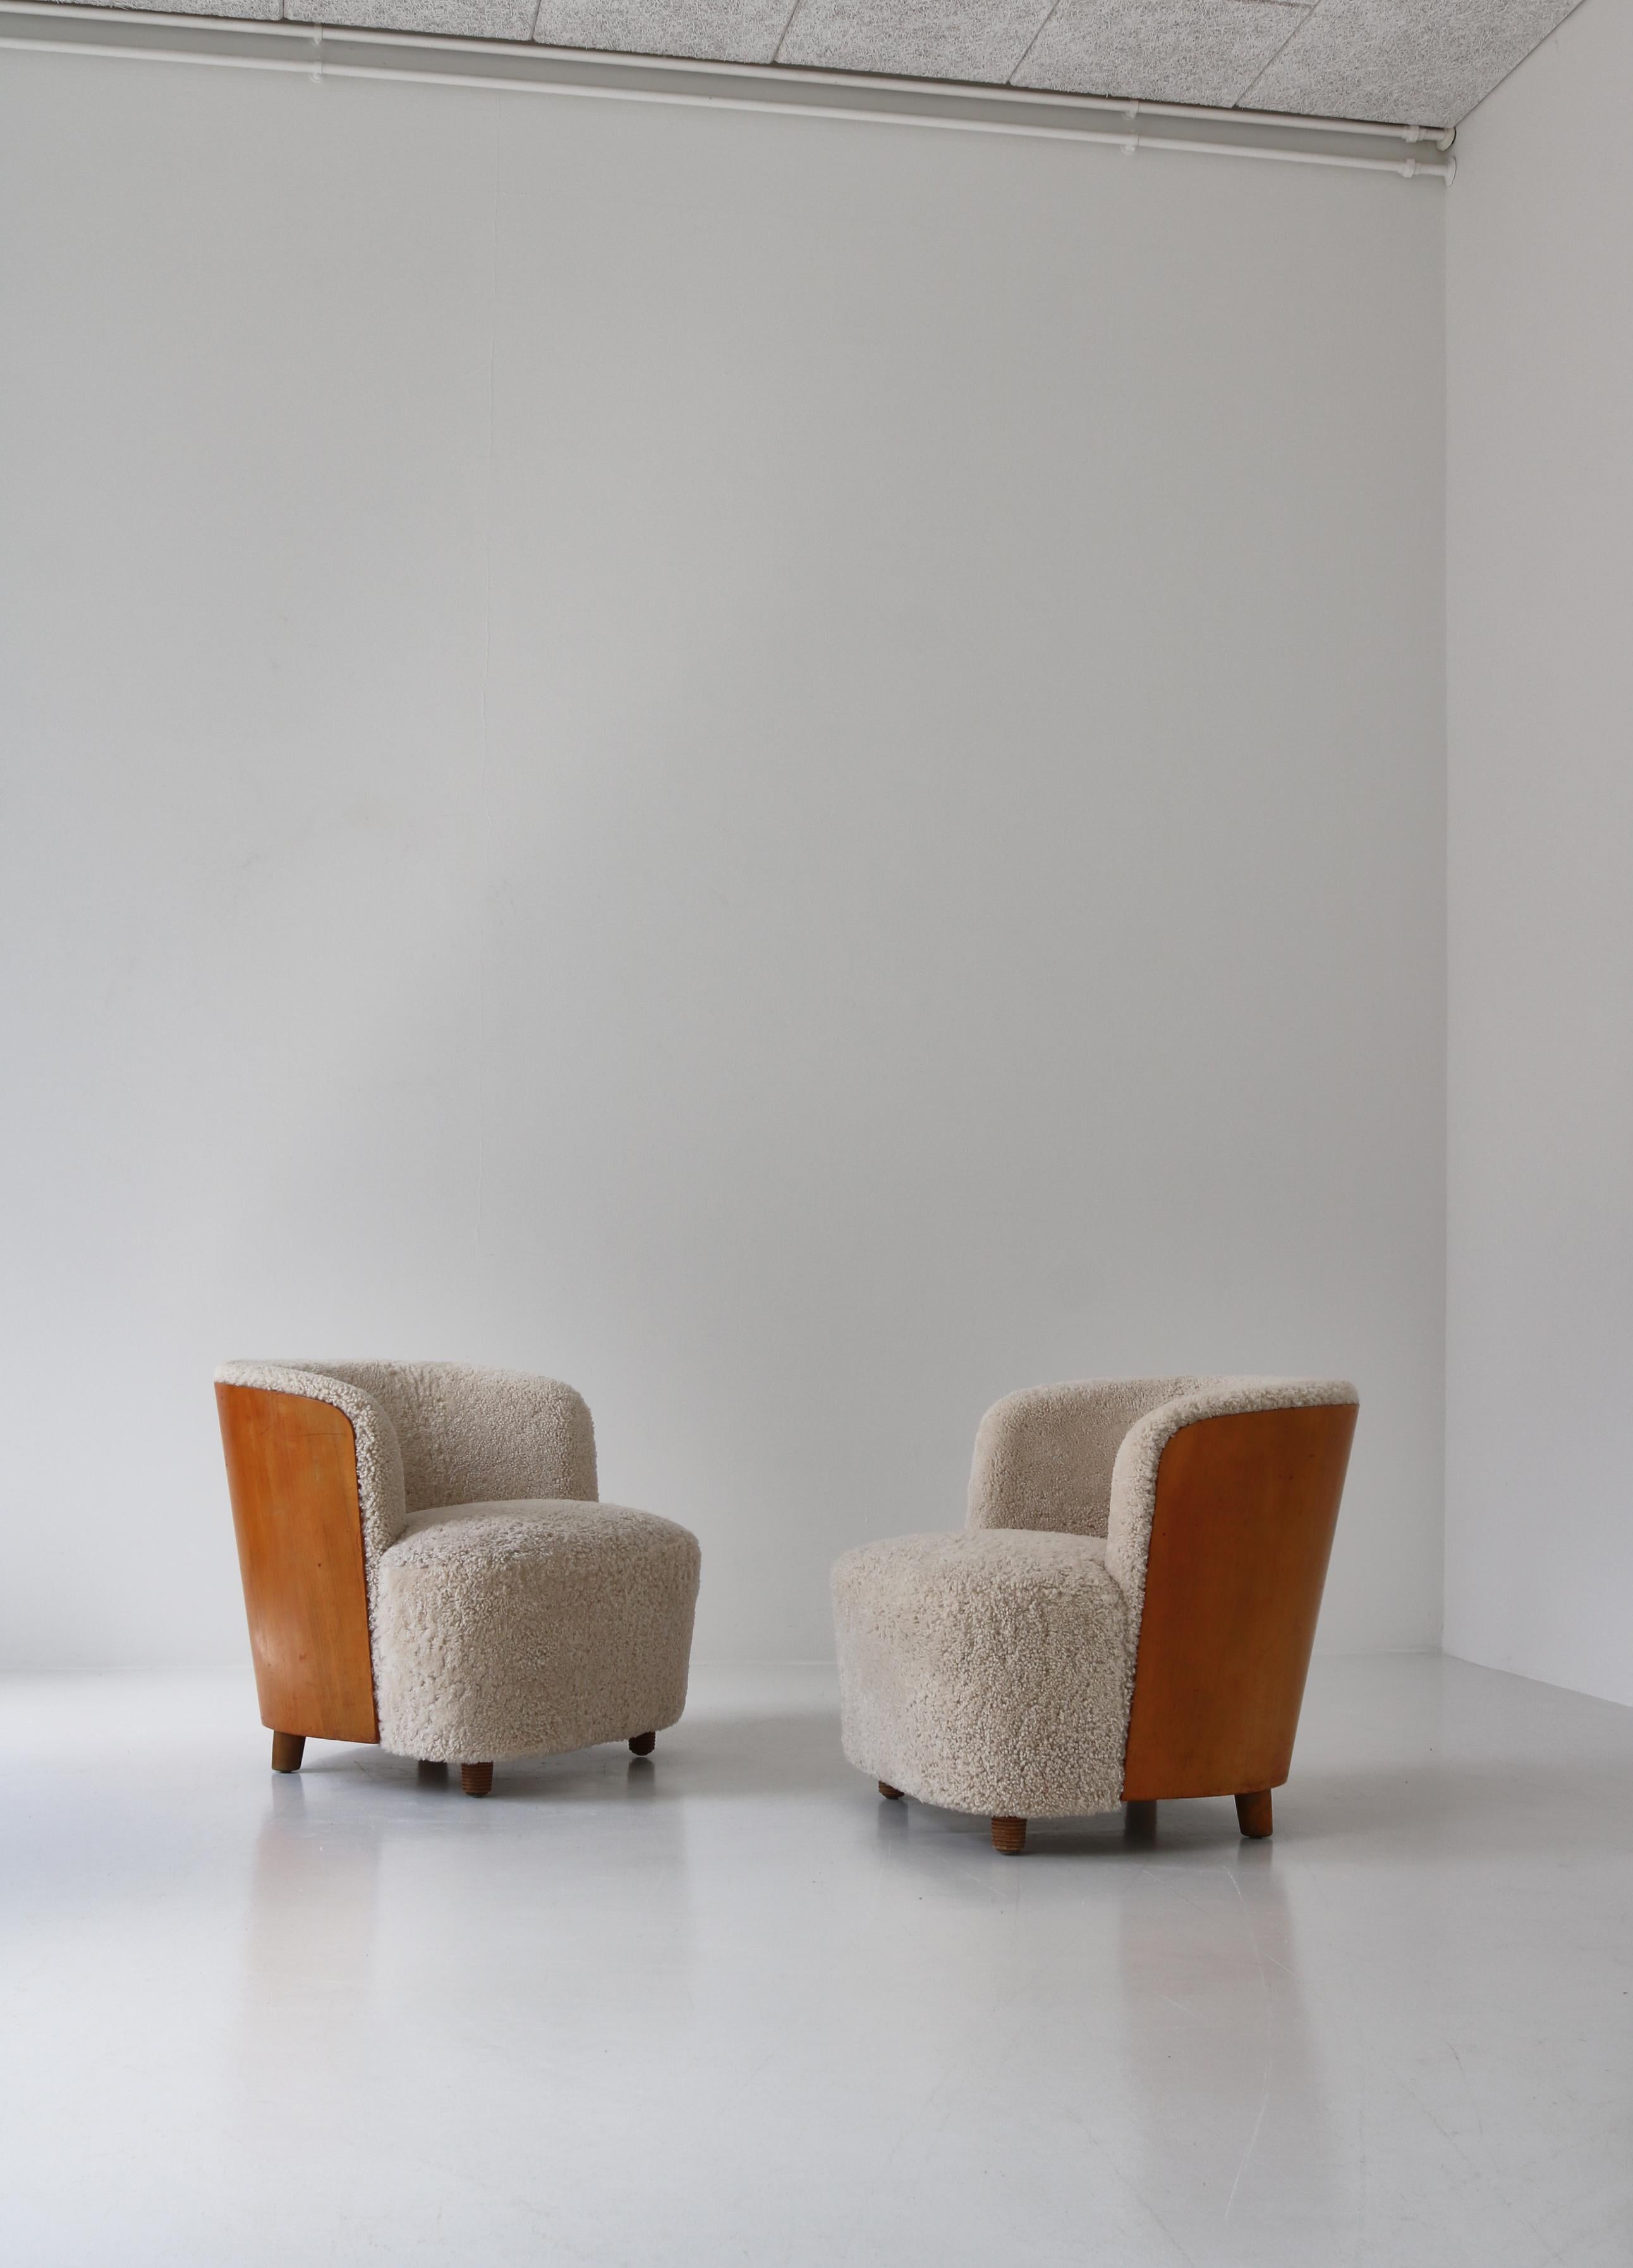 Swedish Scandinavian Modern Sheepskin and Peartree Easy Chairs by Rolf Engströmer, 1934 For Sale